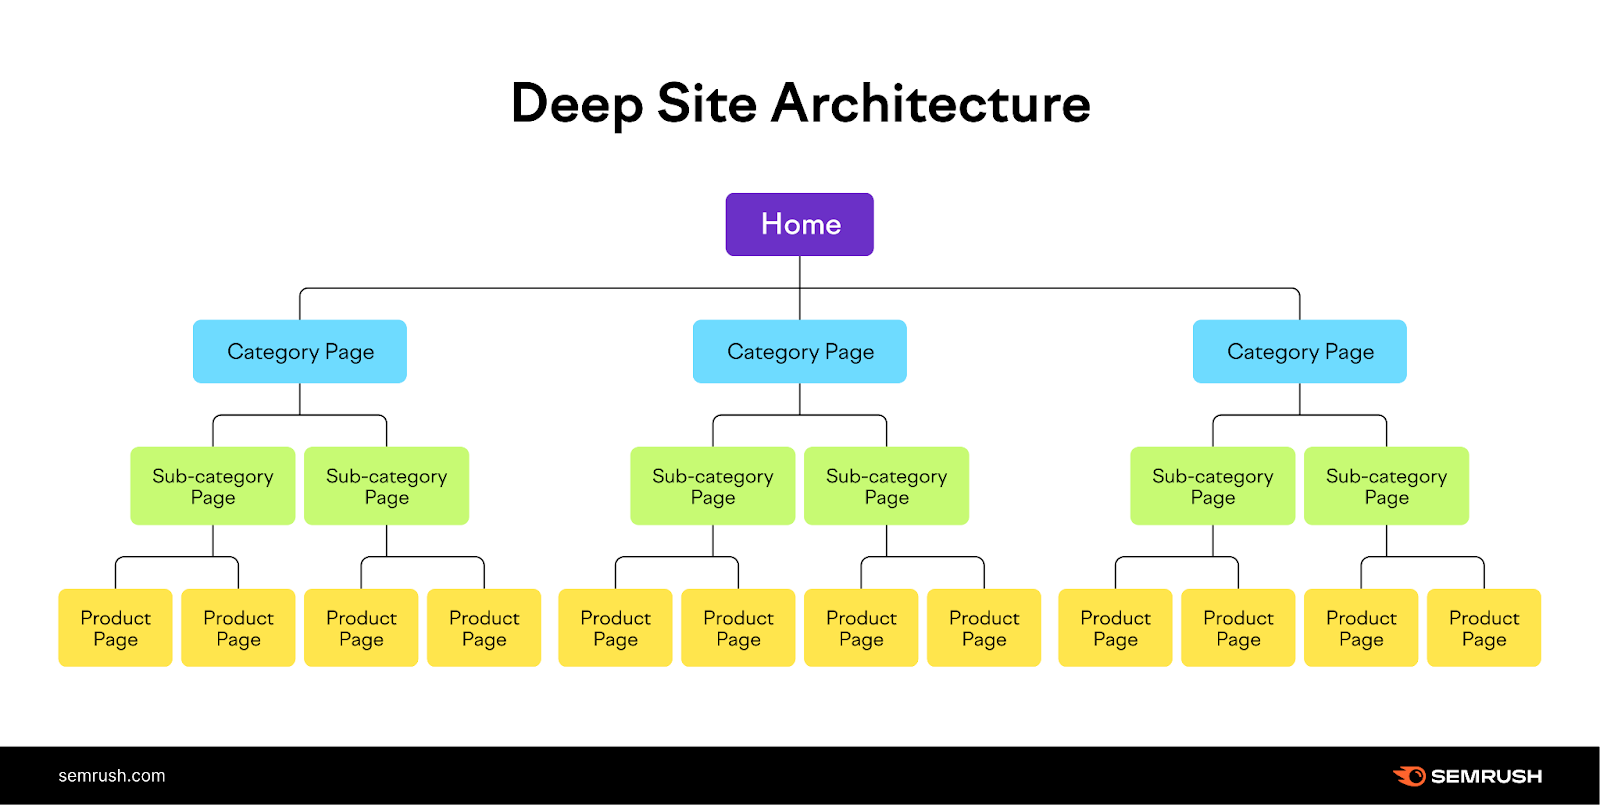 deep site architecture shows branches from category pages to subcategory pages to product pages